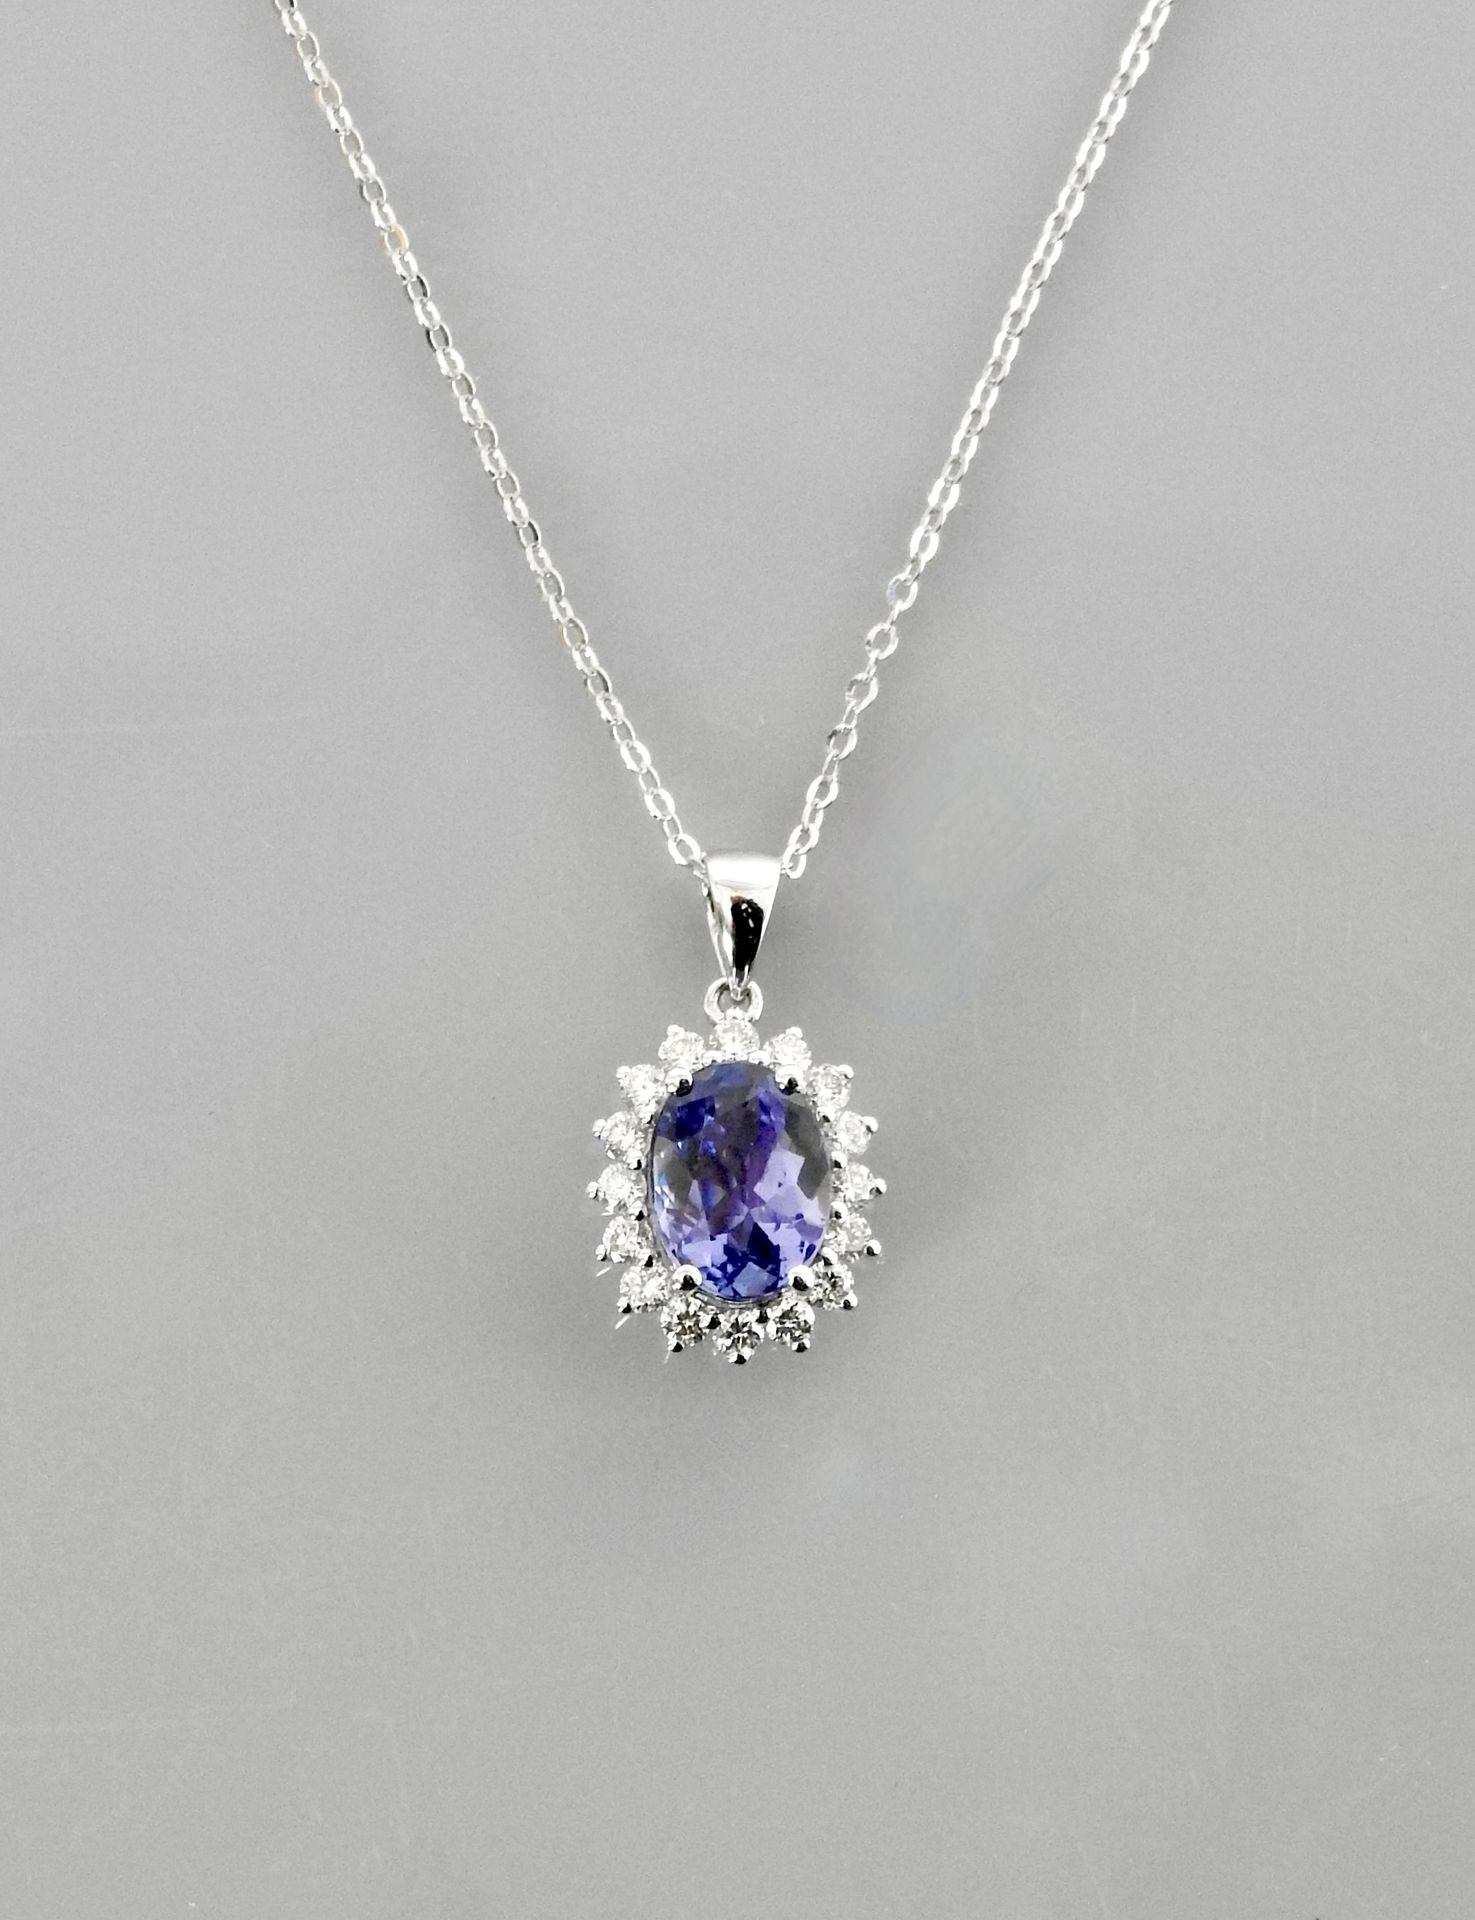 Null Chain and pendant in white gold, 750 MM, set with an oval tanzanite weighin&hellip;